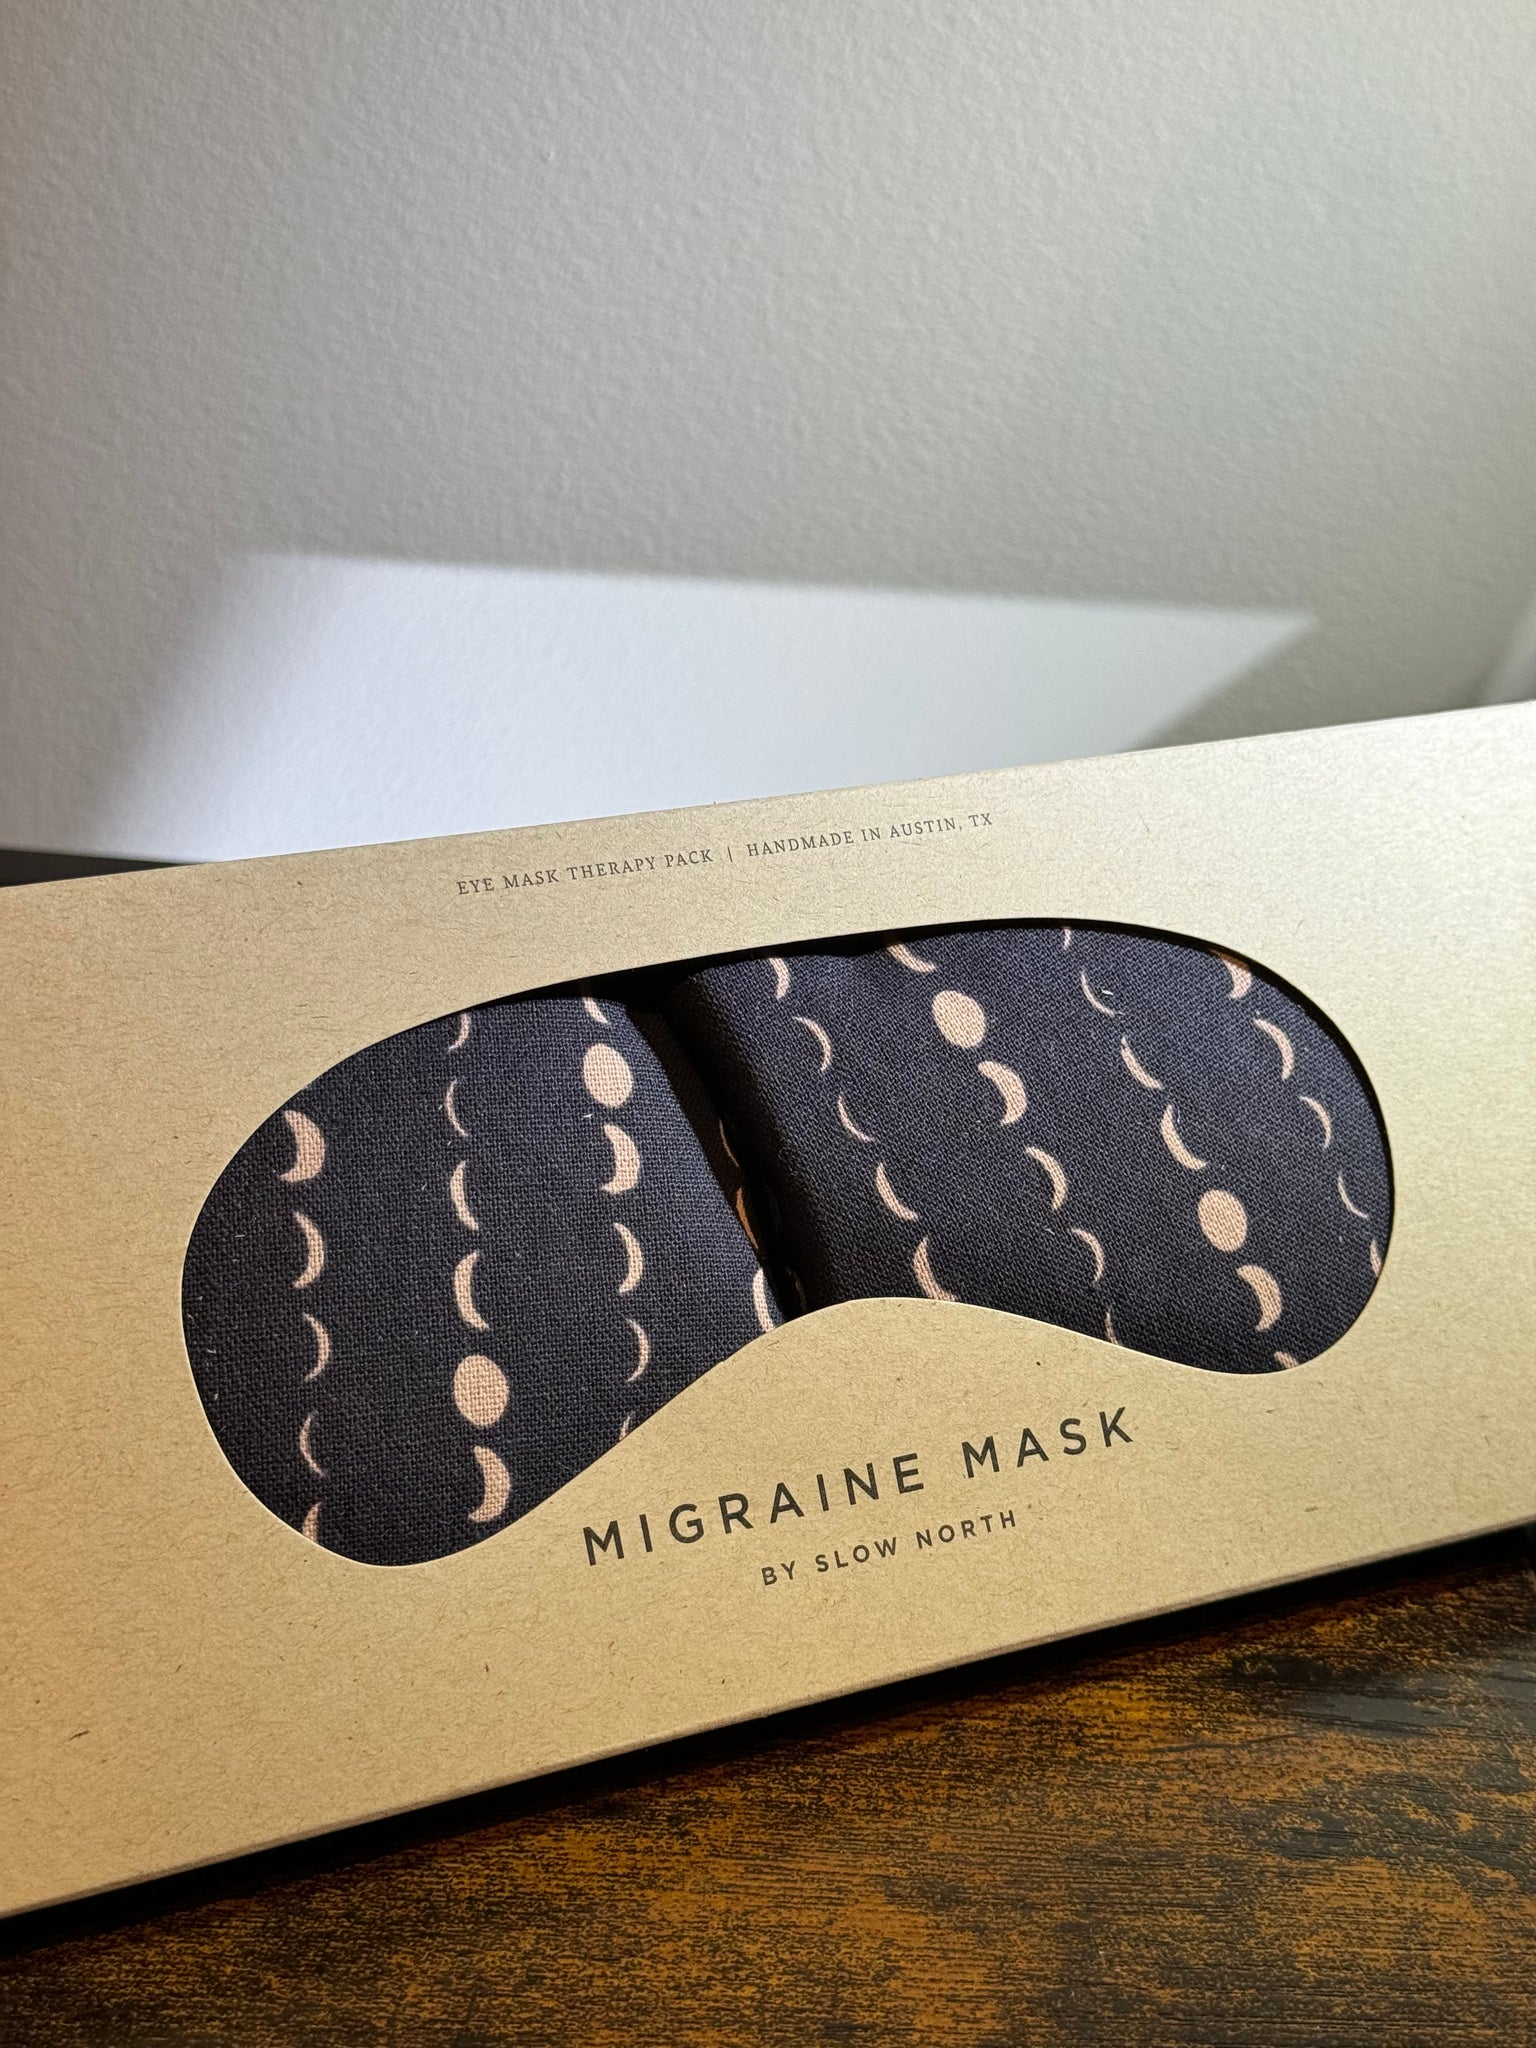 Migraine Mask Therapy Pack